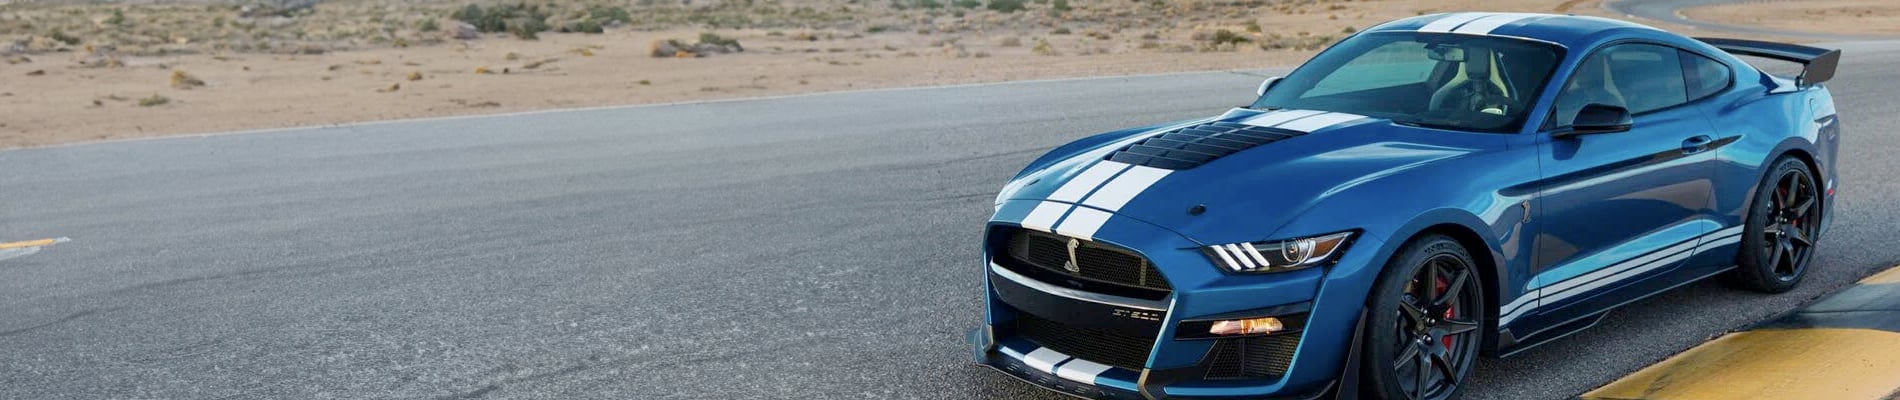 Ford Mustang Accessories, Aftermarket Parts, Mods & Upgrades - AutoAccessoriesGarage.com